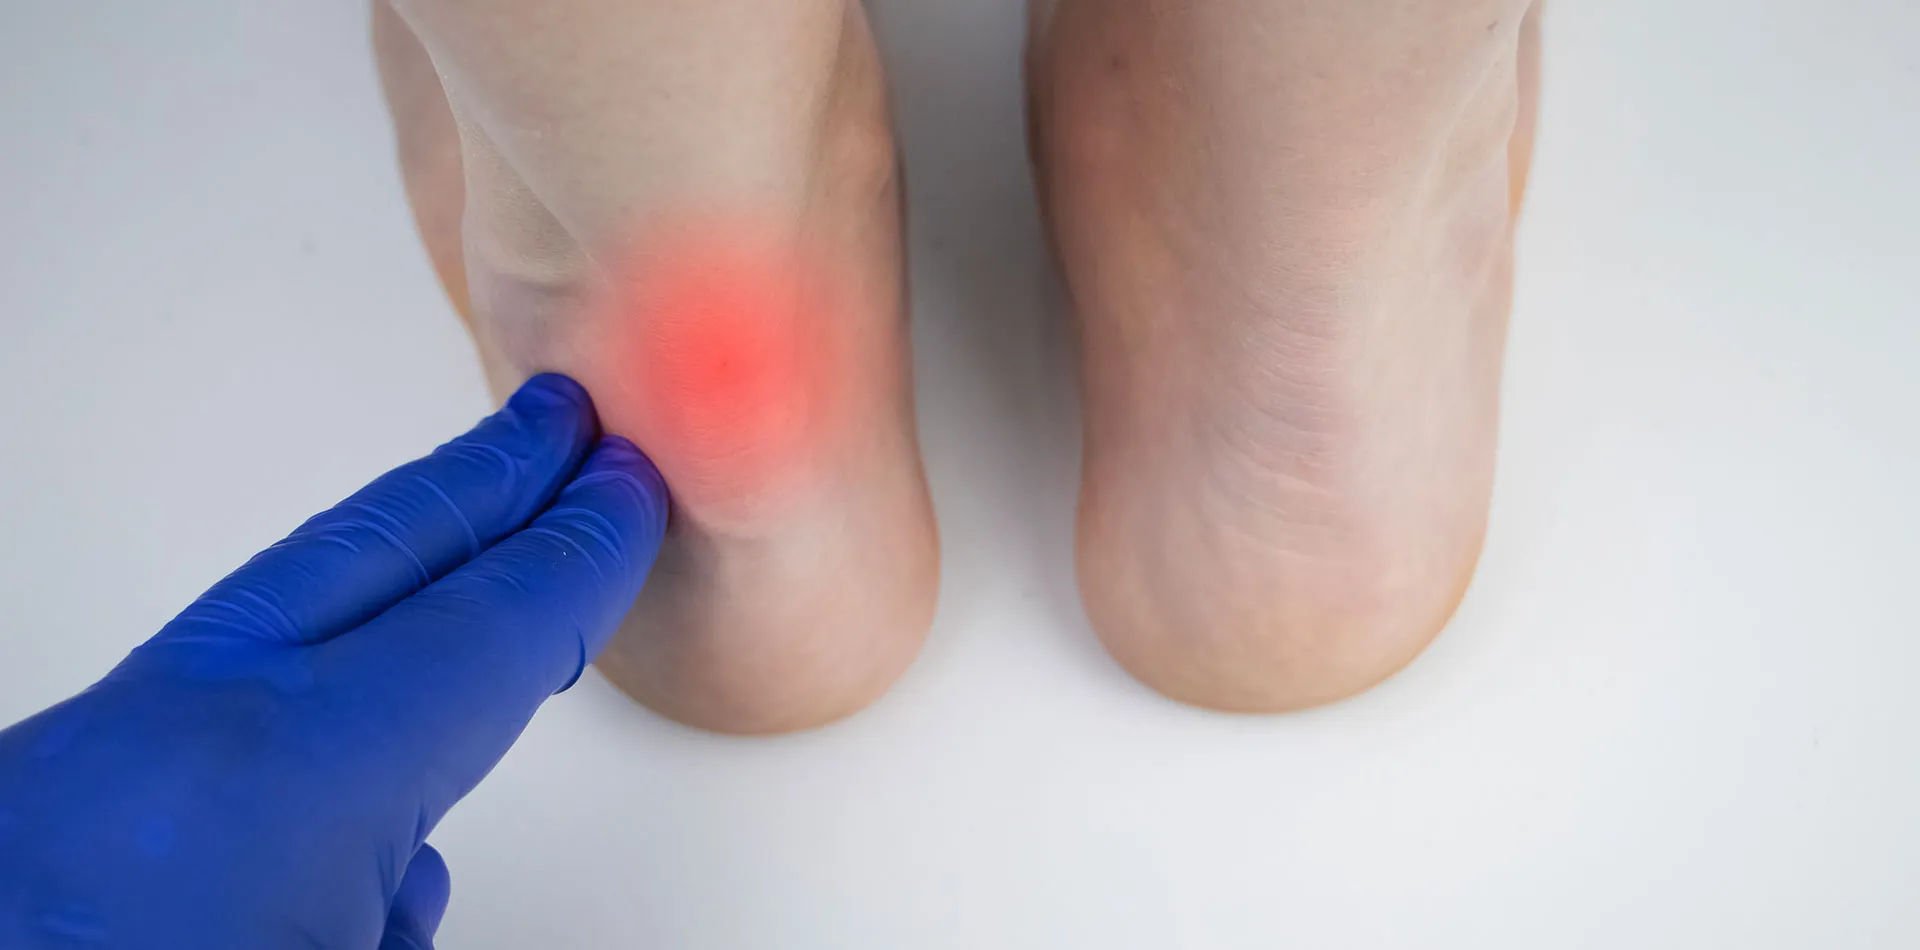 Is your child experiencing joint pain? Might be a symptom of Pediatric Gout